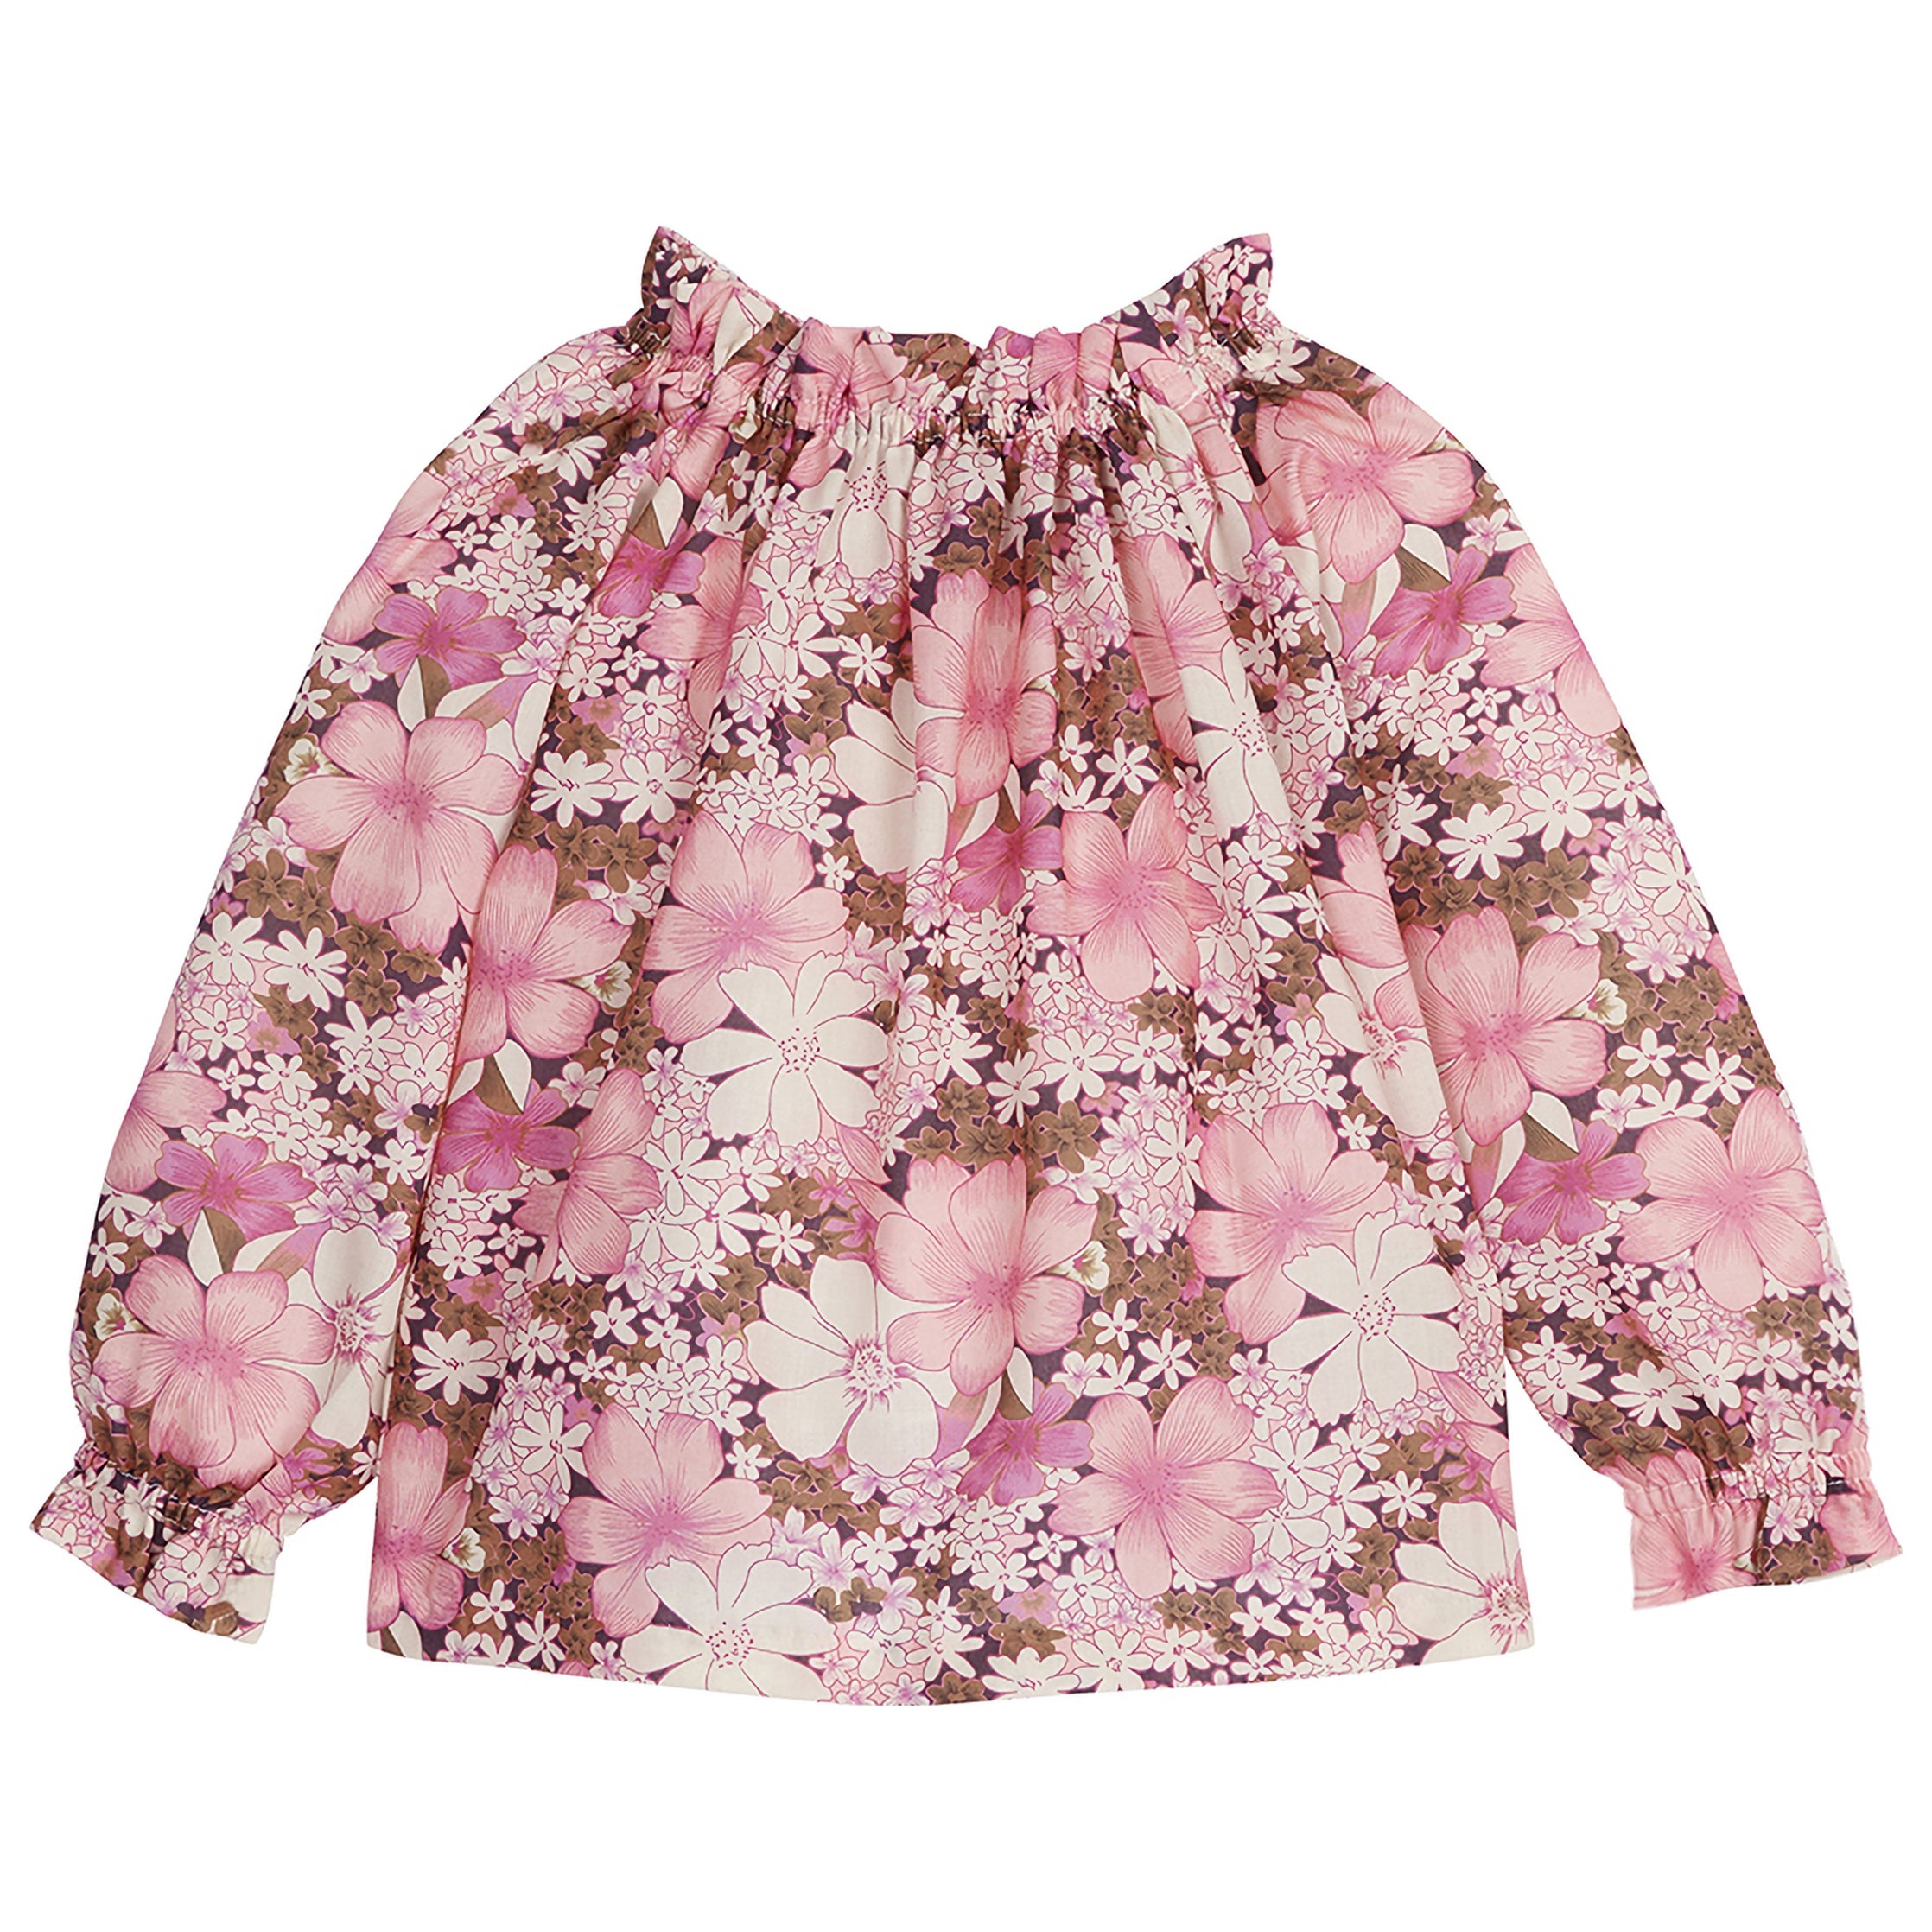 Tory Top - Fruit Punch Floral